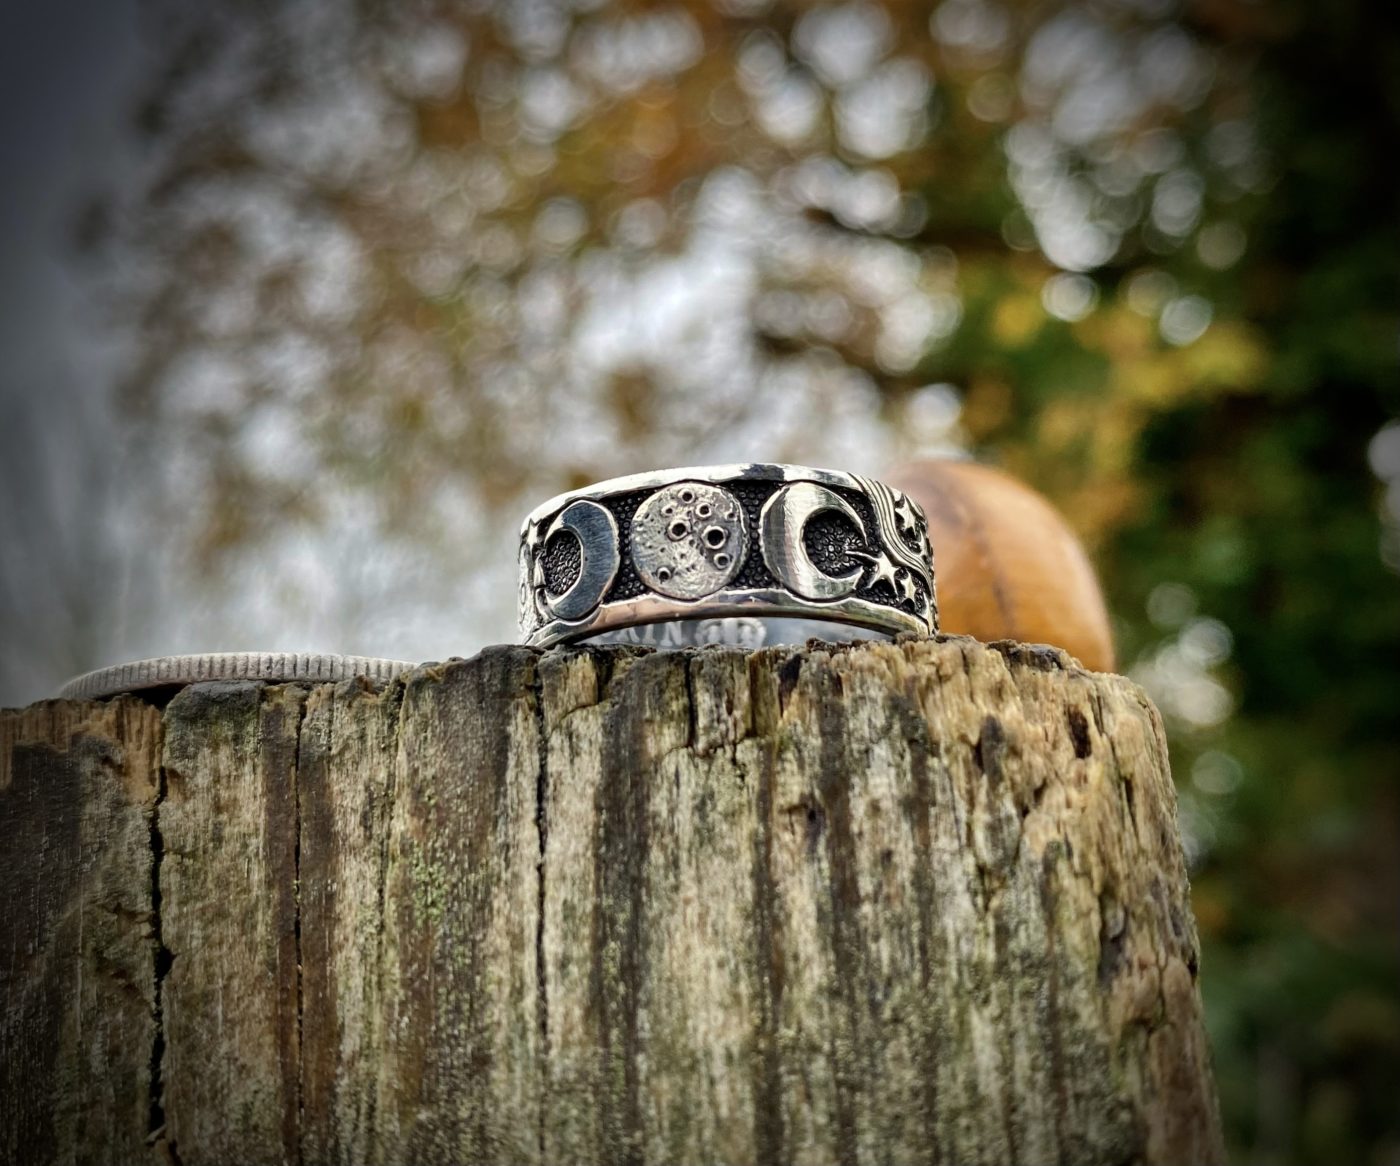 handfasting hand-fasting ring silver coin ring hand made and recycled using traditional hand tools and green ethical principles. Celebrating the circle of life, the equinox, the solstice